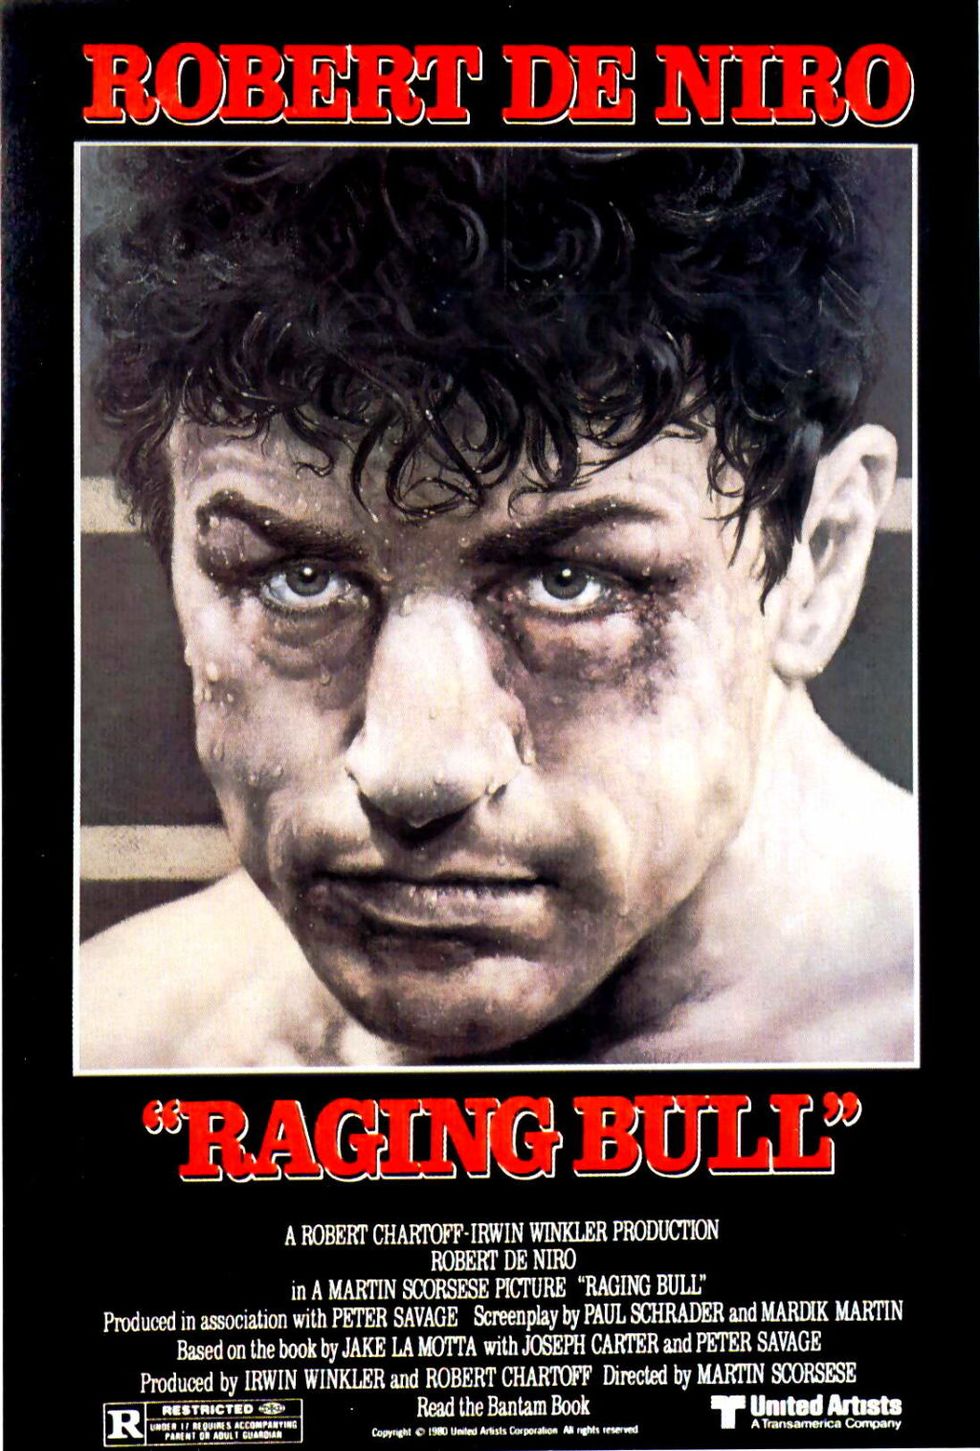 <p>Undeniably one of Martin Scorsese's best, <i data-redactor-tag="i">Raging Bull</i> features Robert De Niro as a tumultuous, but lovable, boxer.</p>